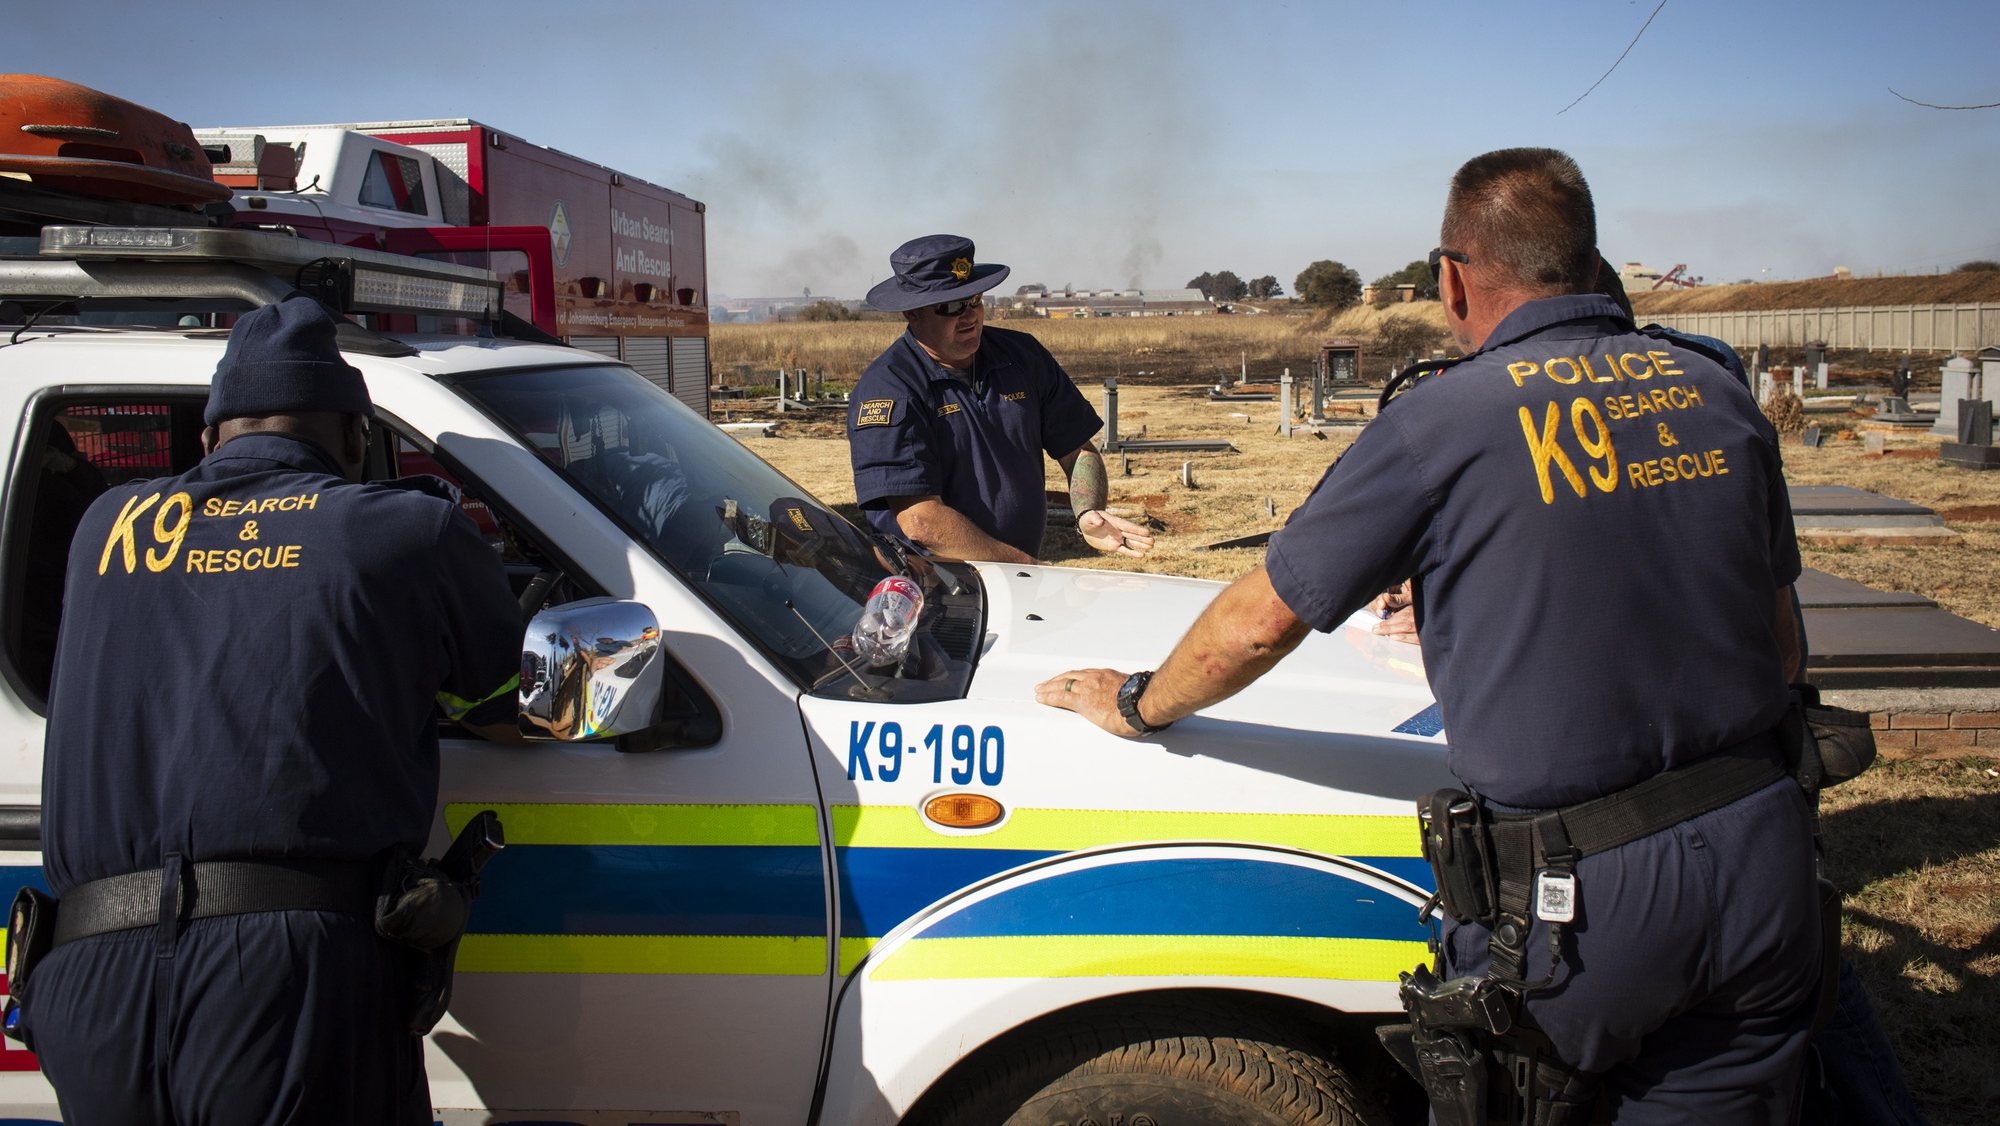 epa10018126 Members of the SAPS (South African Police Force) K9 unit discuss their approach during the ongoing search operation for a boy, Khayalethu Magadla (6), who fell into a water pipe six days ago, Soweto, Johannesburg , South Africa, 17 June 2022. Johannesburg EMS and SAPS police unites are continuing their search with robots being used in the underground waterways near where the boy went missing.  EPA/KIM LUDBROOK